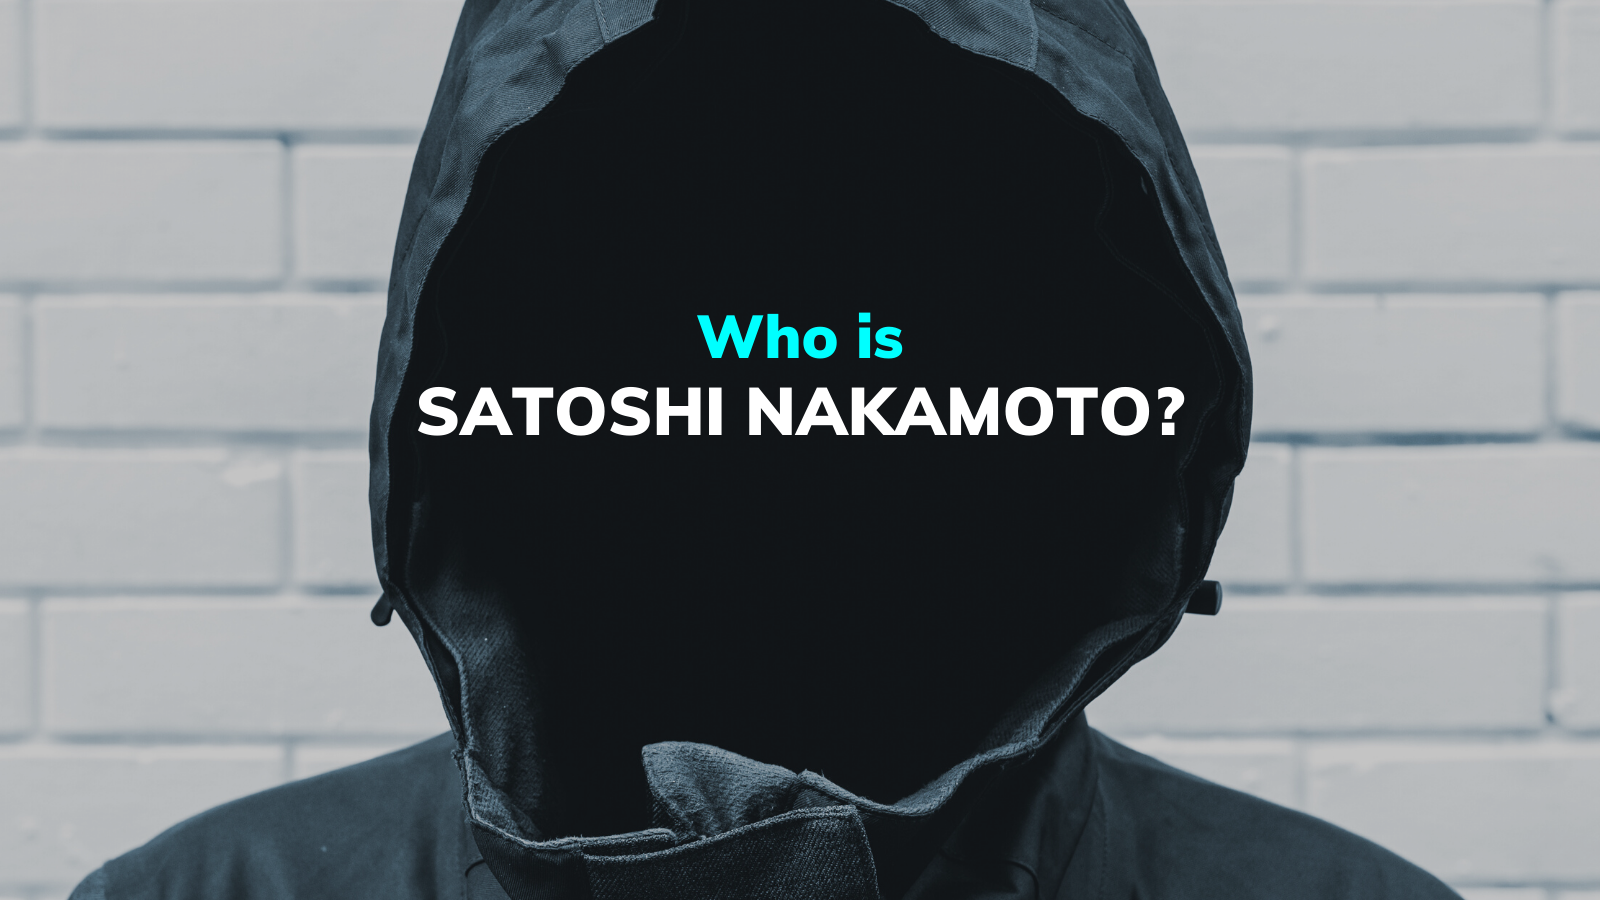 Satoshi Nakamoto, one of the most mysterious characters of the 21st century